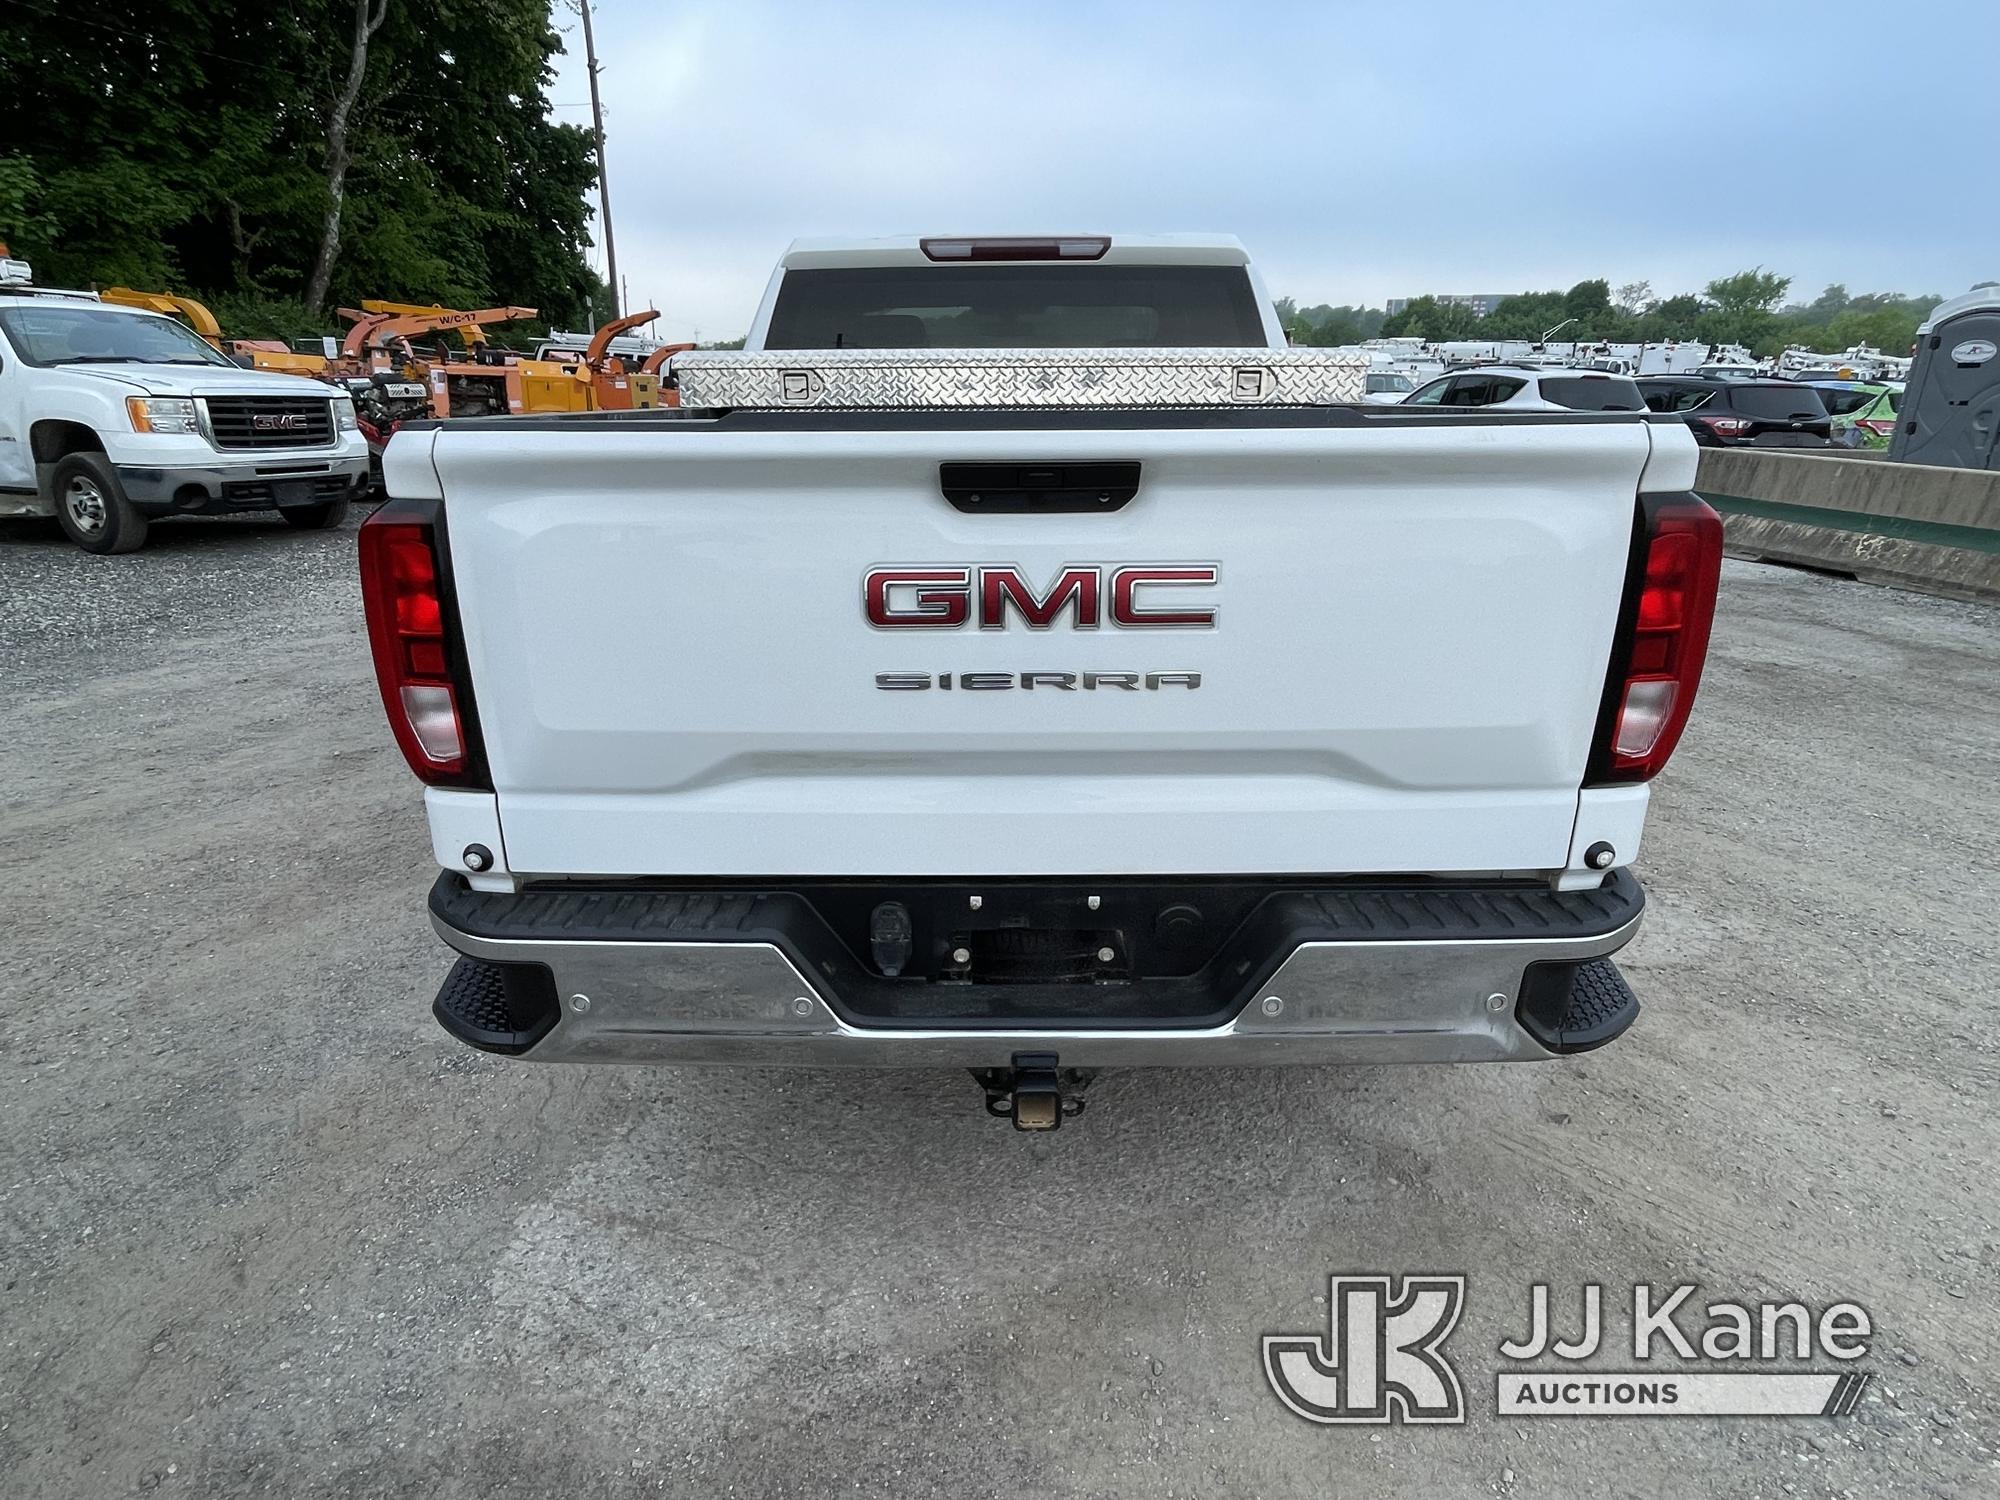 (Plymouth Meeting, PA) 2019 GMC Sierra 1500 4x4 Extended-Cab Pickup Truck Runs & Moves, Body & Rust